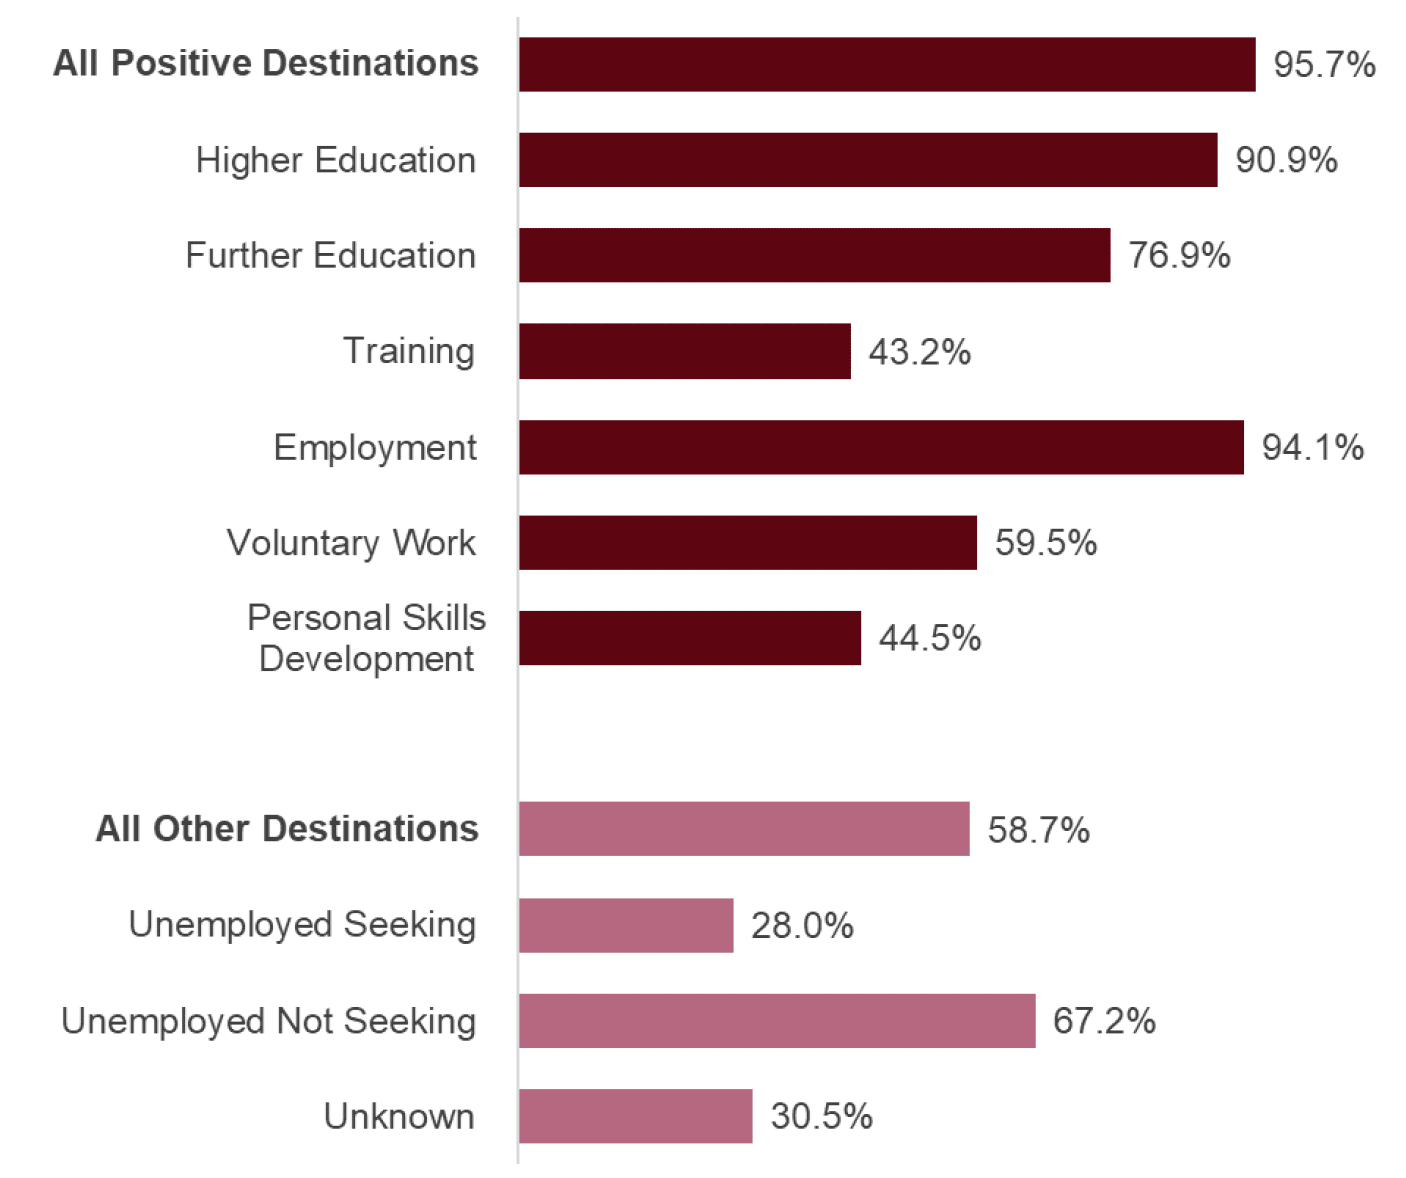 In 2021/22, 95.7% of leavers in a positive initial destination were also in a positive follow-up destination. Employment was the most sustained destination category. 94.1% of leavers whose initial destination was Employment were also in Employment at follow-up (although leavers may have changed their employer or type of employment during this time).  58.7% of leavers who were in an 'other' destination at initial were still in an 'other' destination at follow-up. 